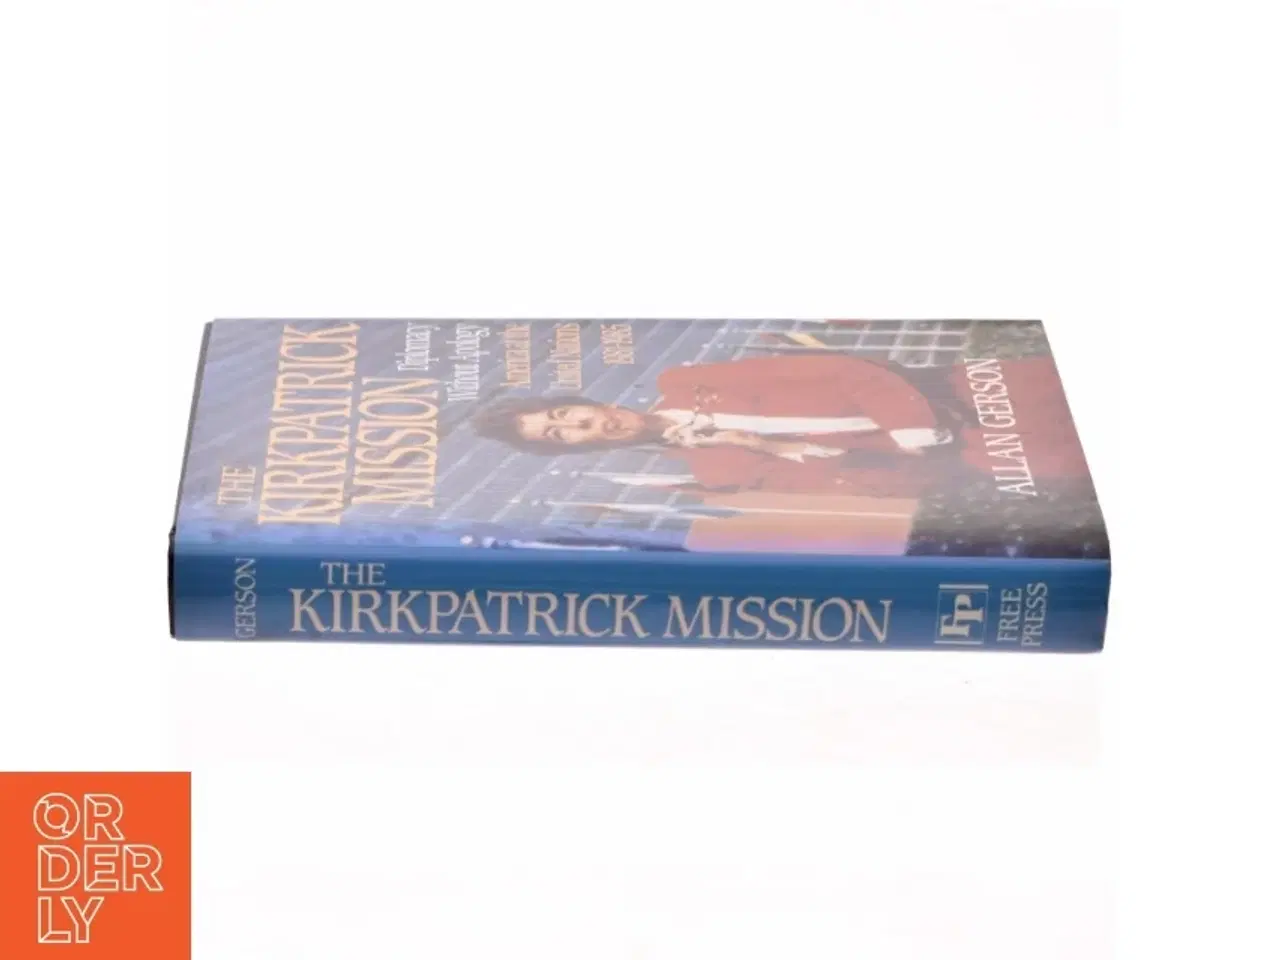 Billede 2 - Kirkpatrick Mission (Diplomacy Wo Apology Ame at the United Nations 1981 to 85 af Gerson (Bog)